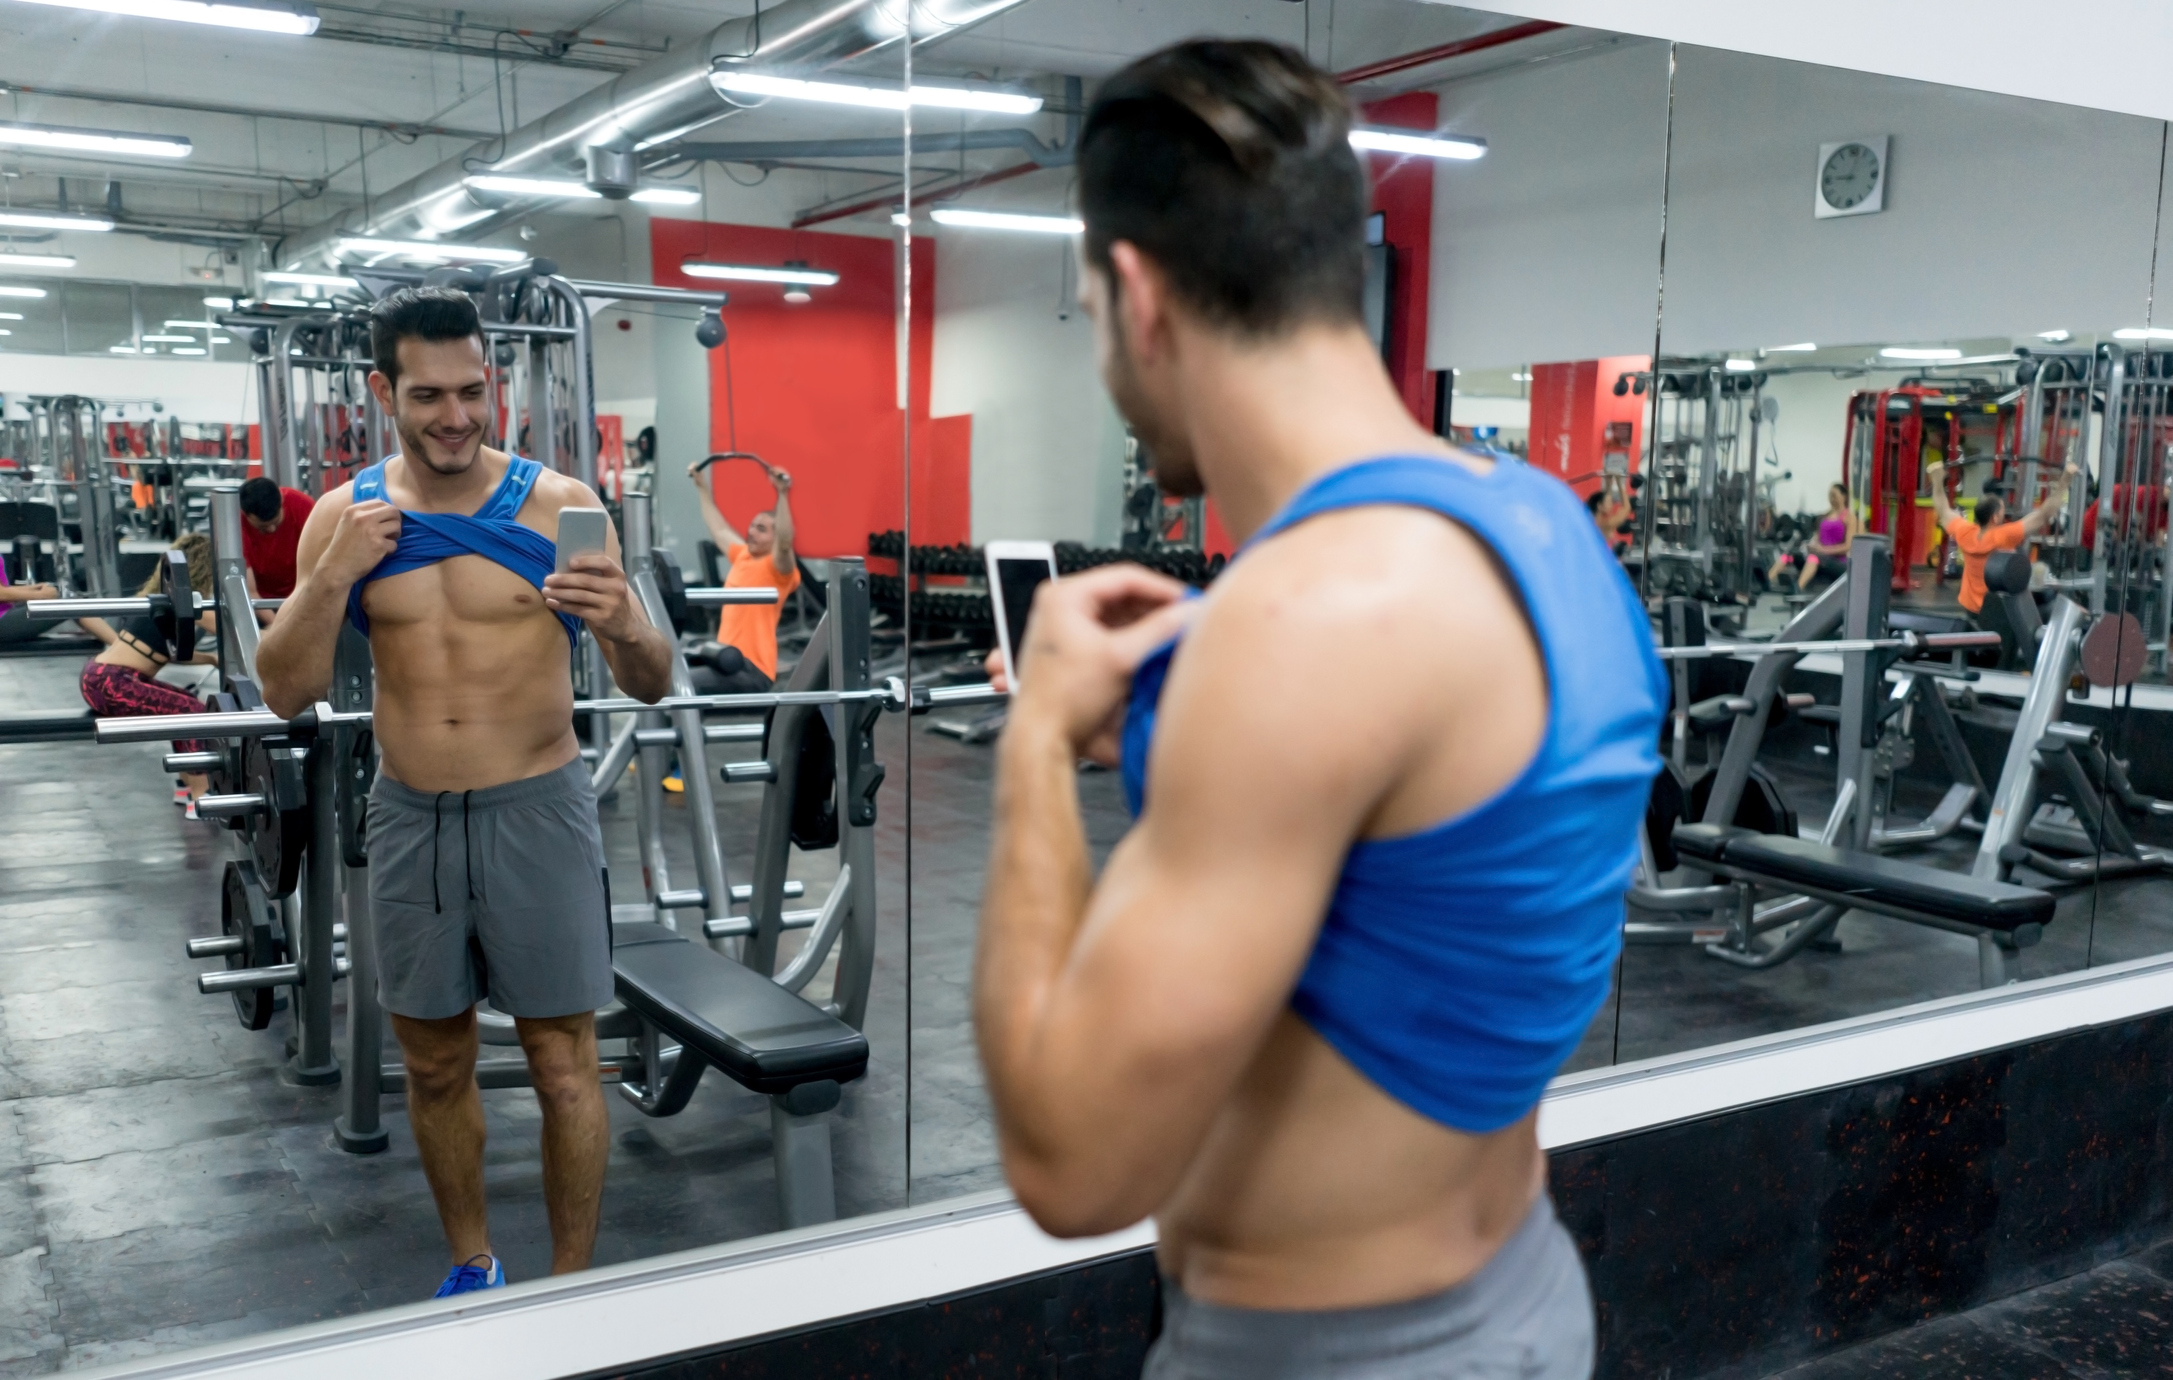 A man taking a selfie in the gym